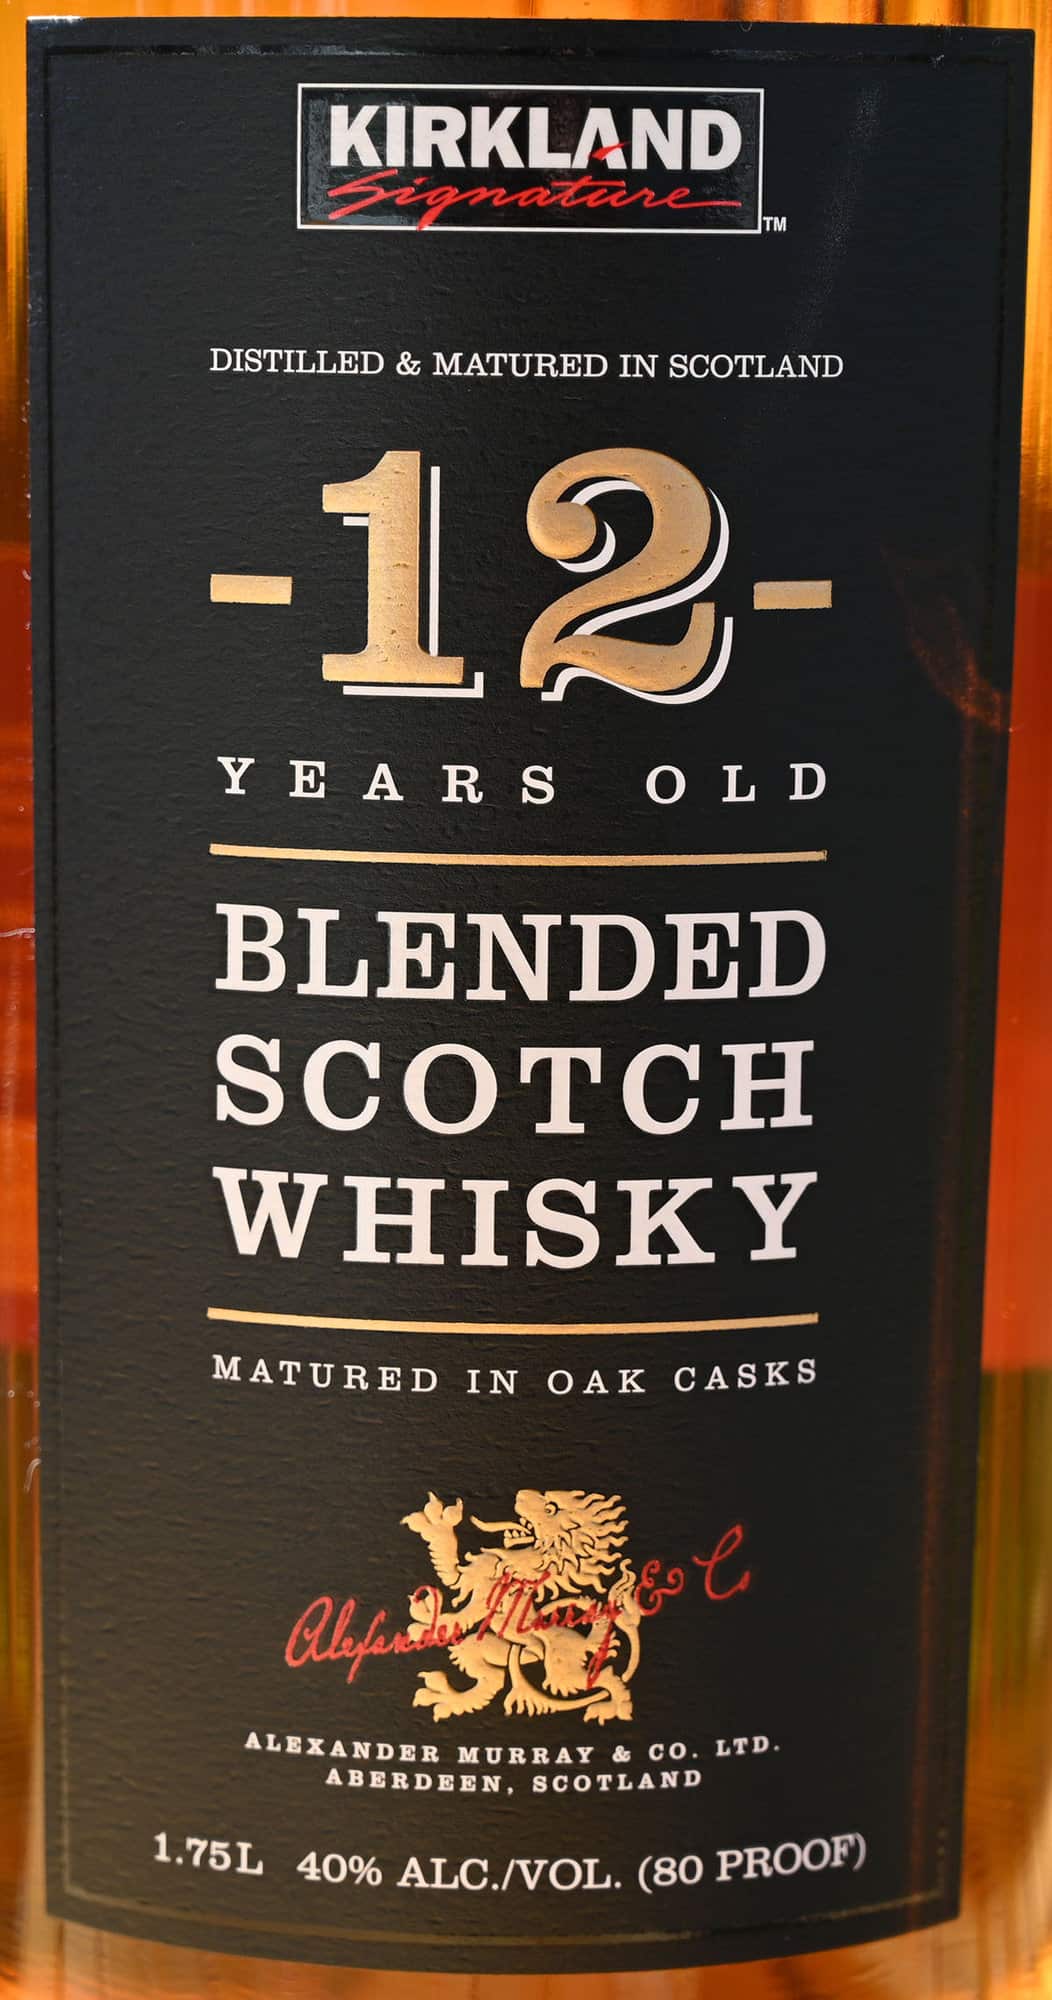 Image of the front label on the bottle on the Costco 12 Years Old Blended Scotch Whisky.